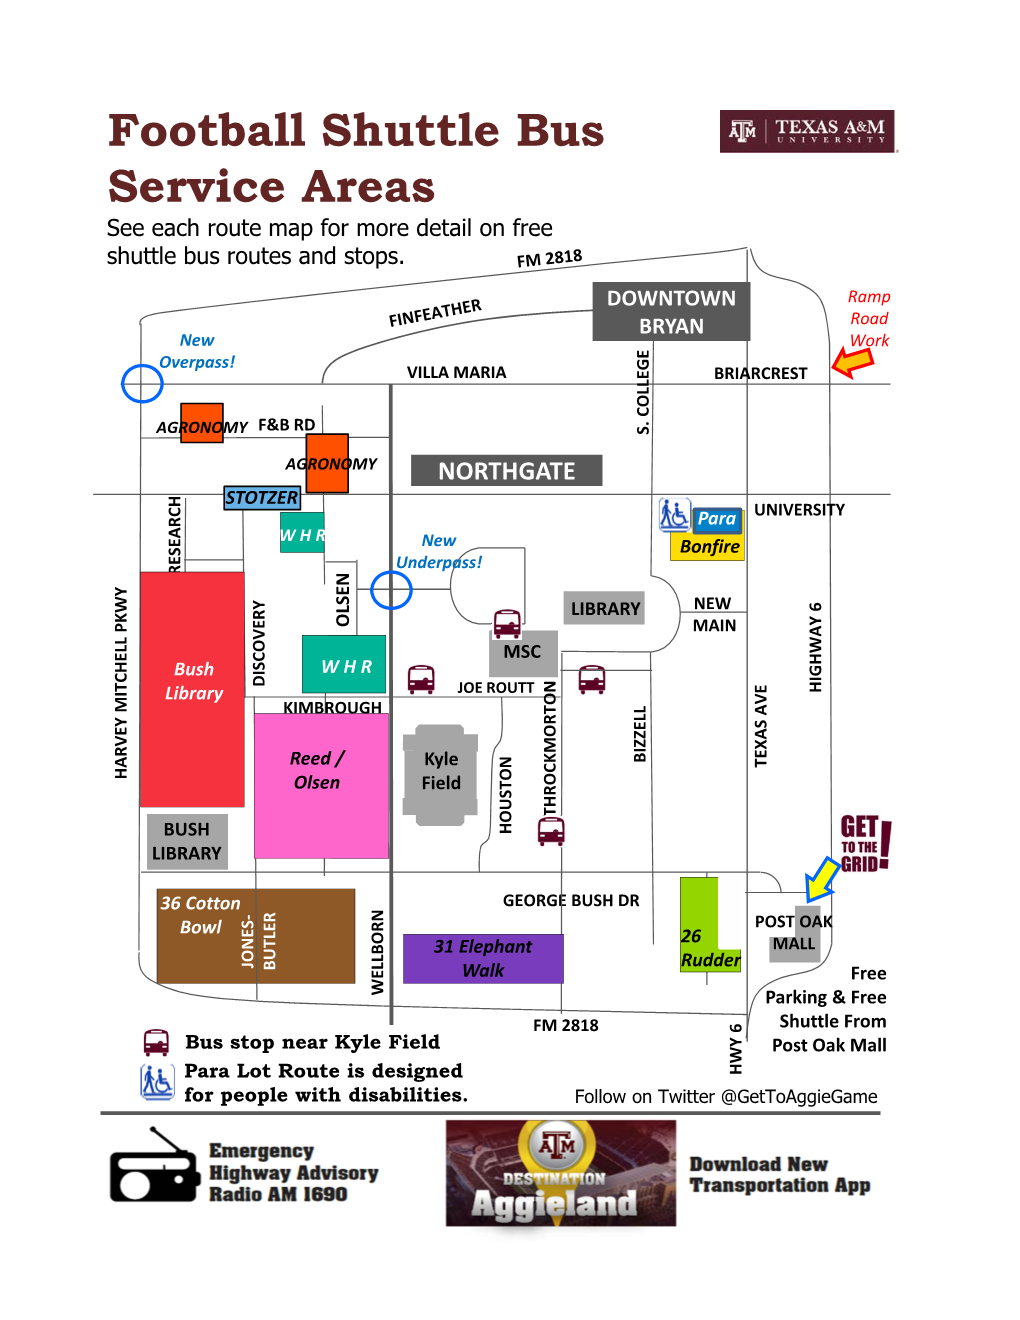 Football Shuttle Bus Service Areas See Each Route Map for More Detail on Free Shuttle Bus Routes and Stops